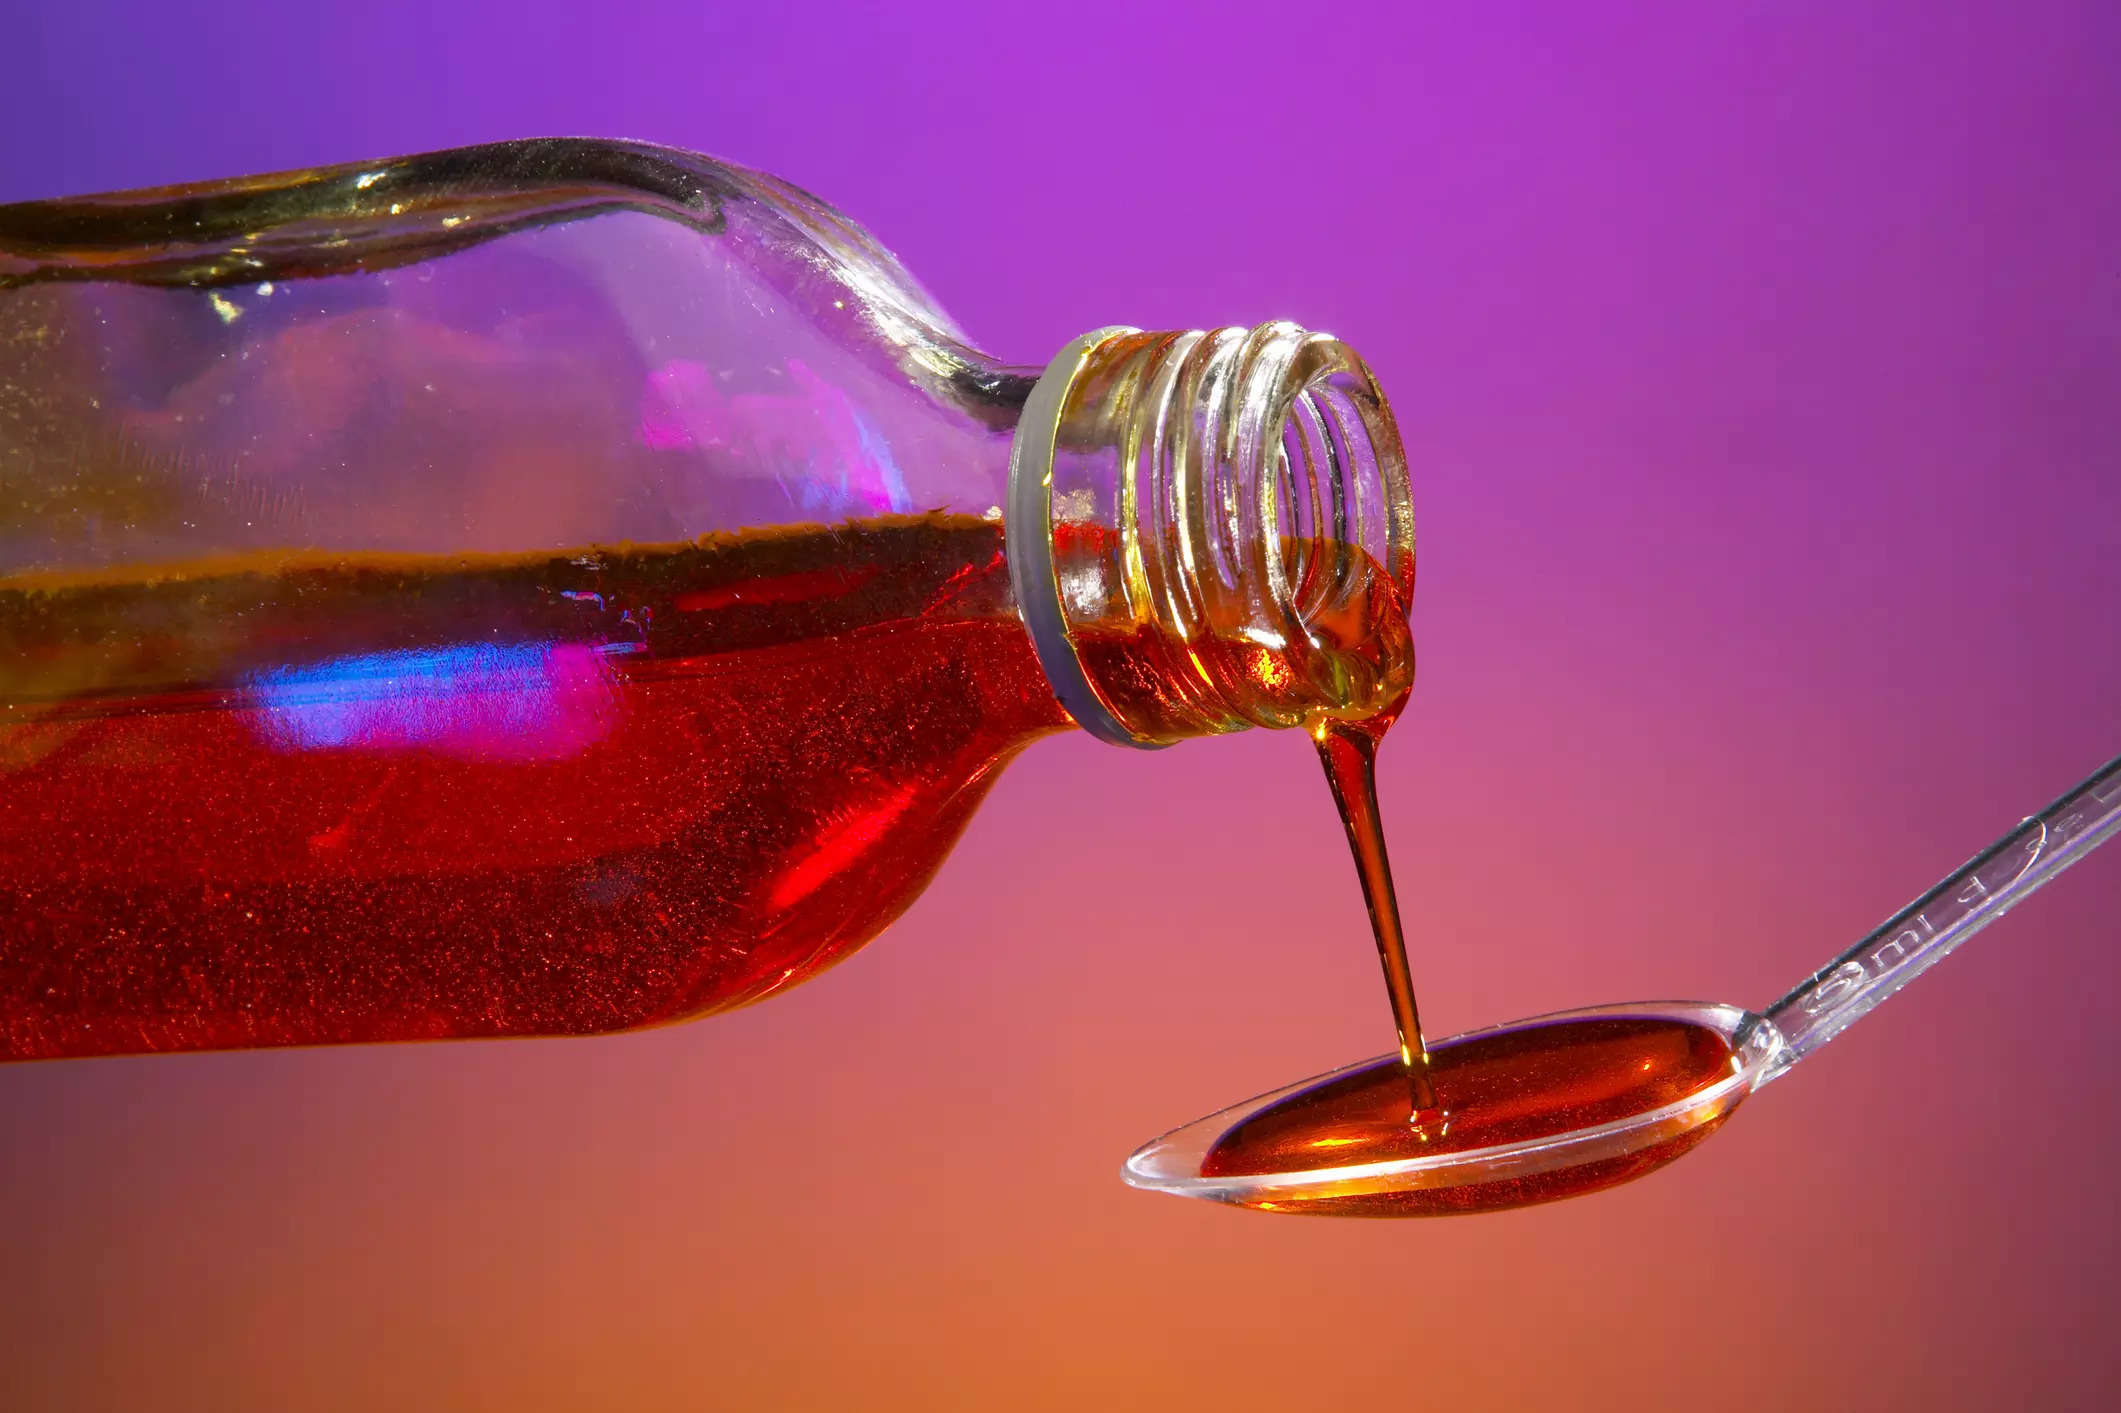 WHO chief Tedros Adhanom Ghebreyesus said earlier this week that the four cough and cold syrups could be associated with acute kidney injuries in the affected children.